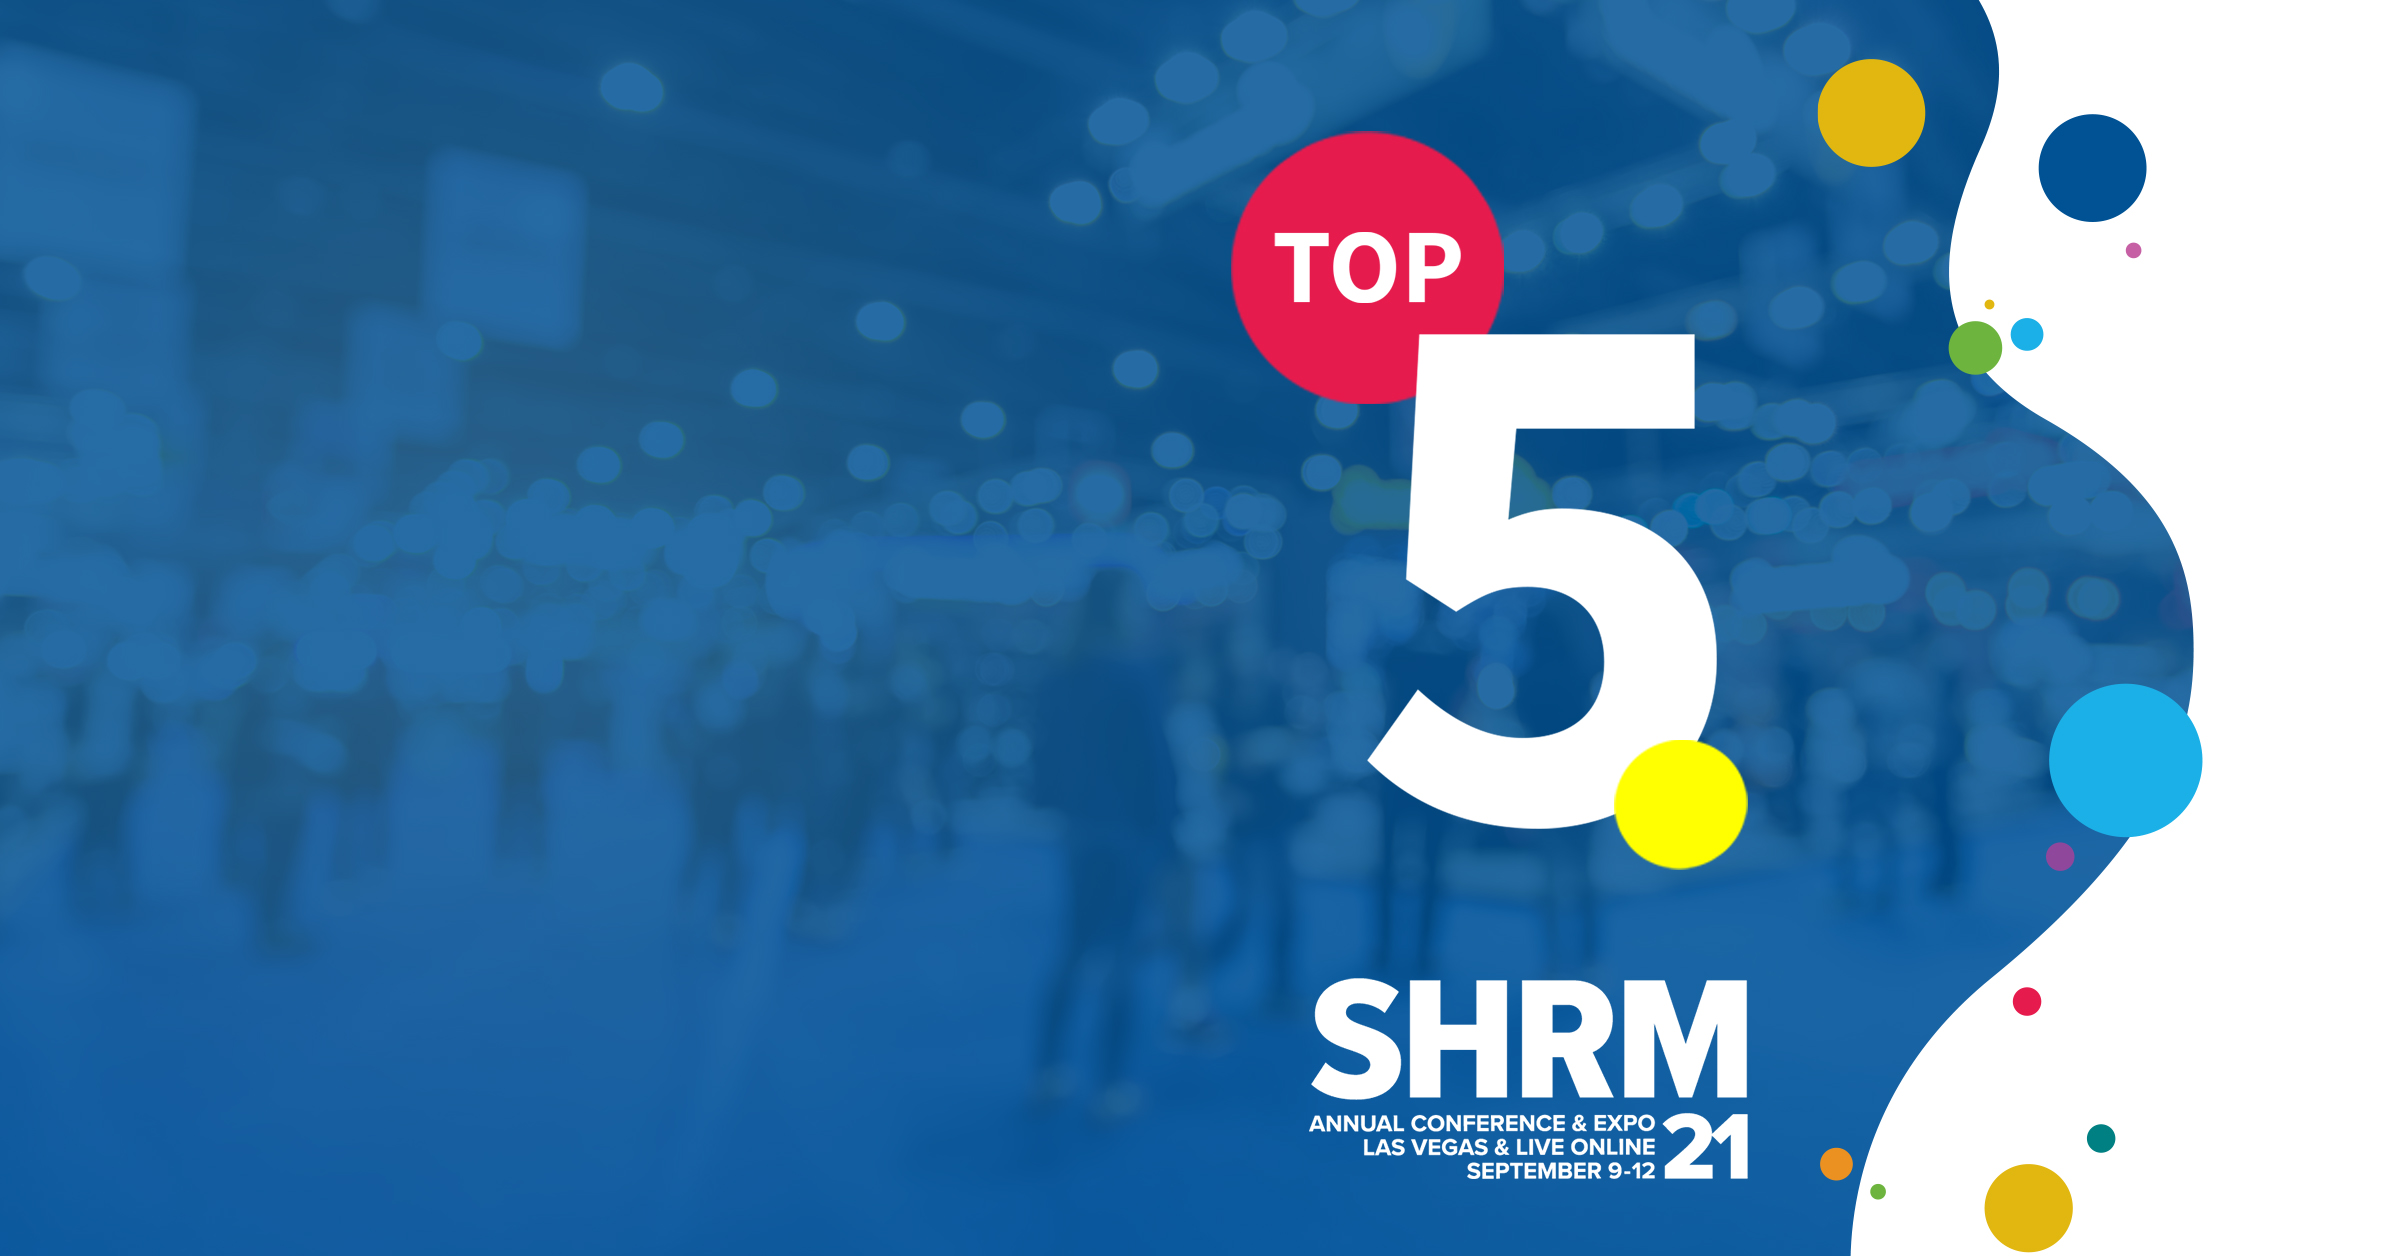 Top Five Things You Don’t Want to Miss at SHRM21